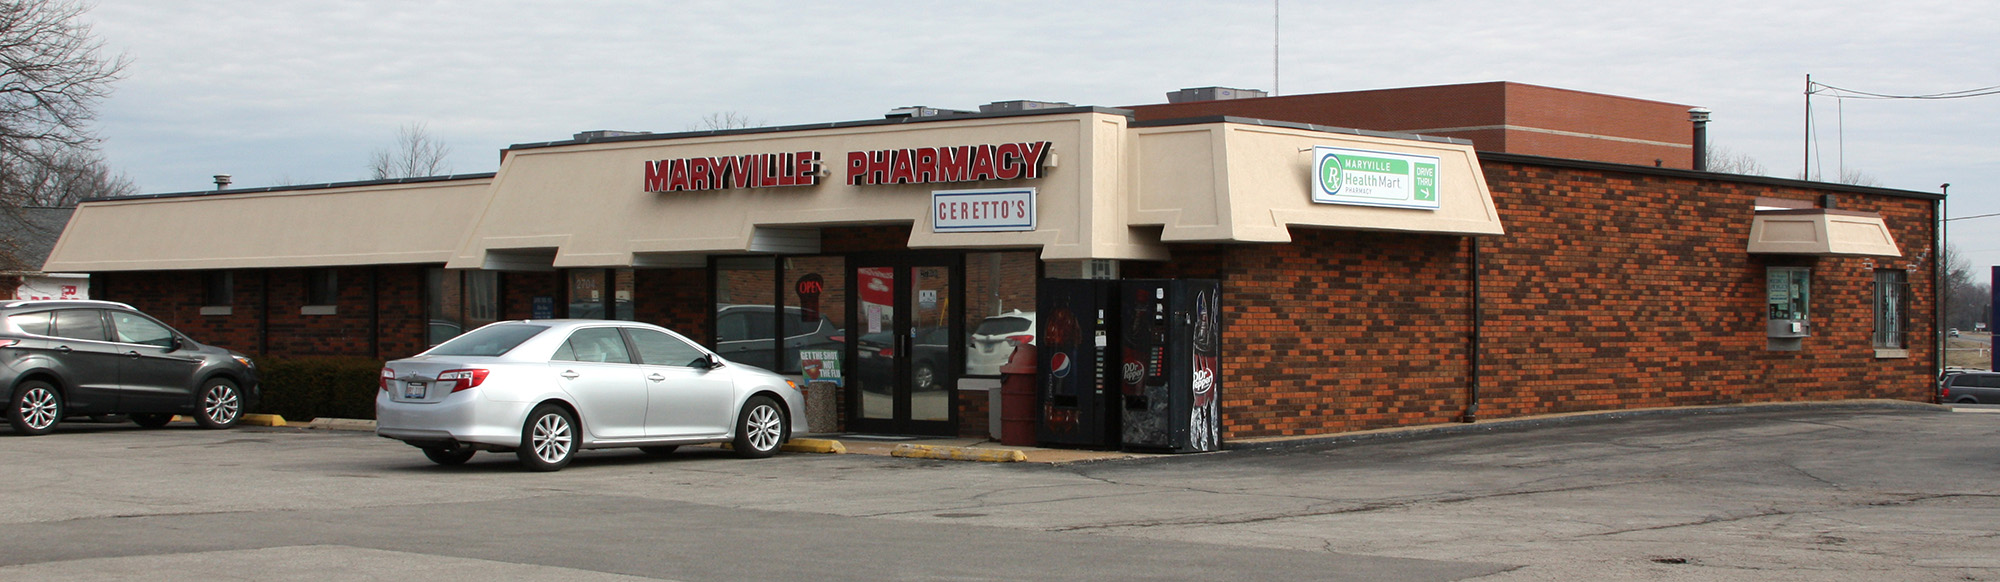 Maryville Pharmacy is Located at 2700 N. Center in Maryville, Illinois